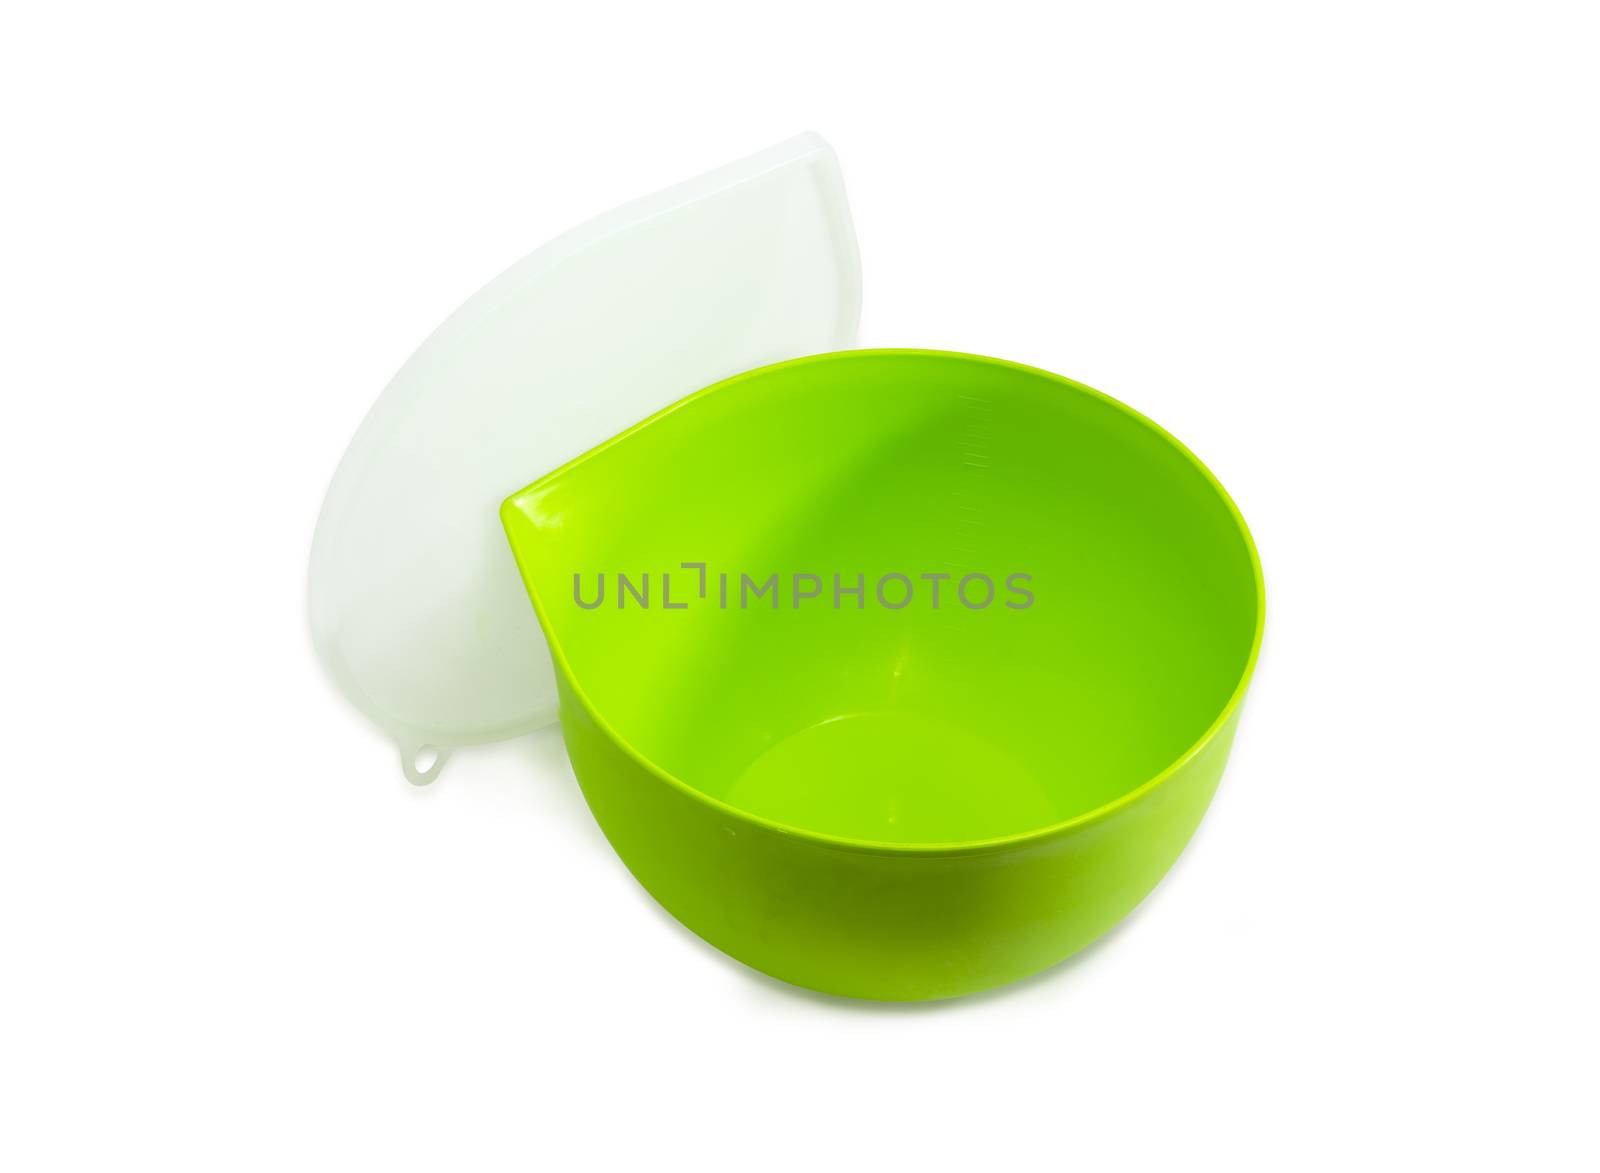 Green reusable plastic round food storage and cooking container for home use with open translucent cover on a light background
